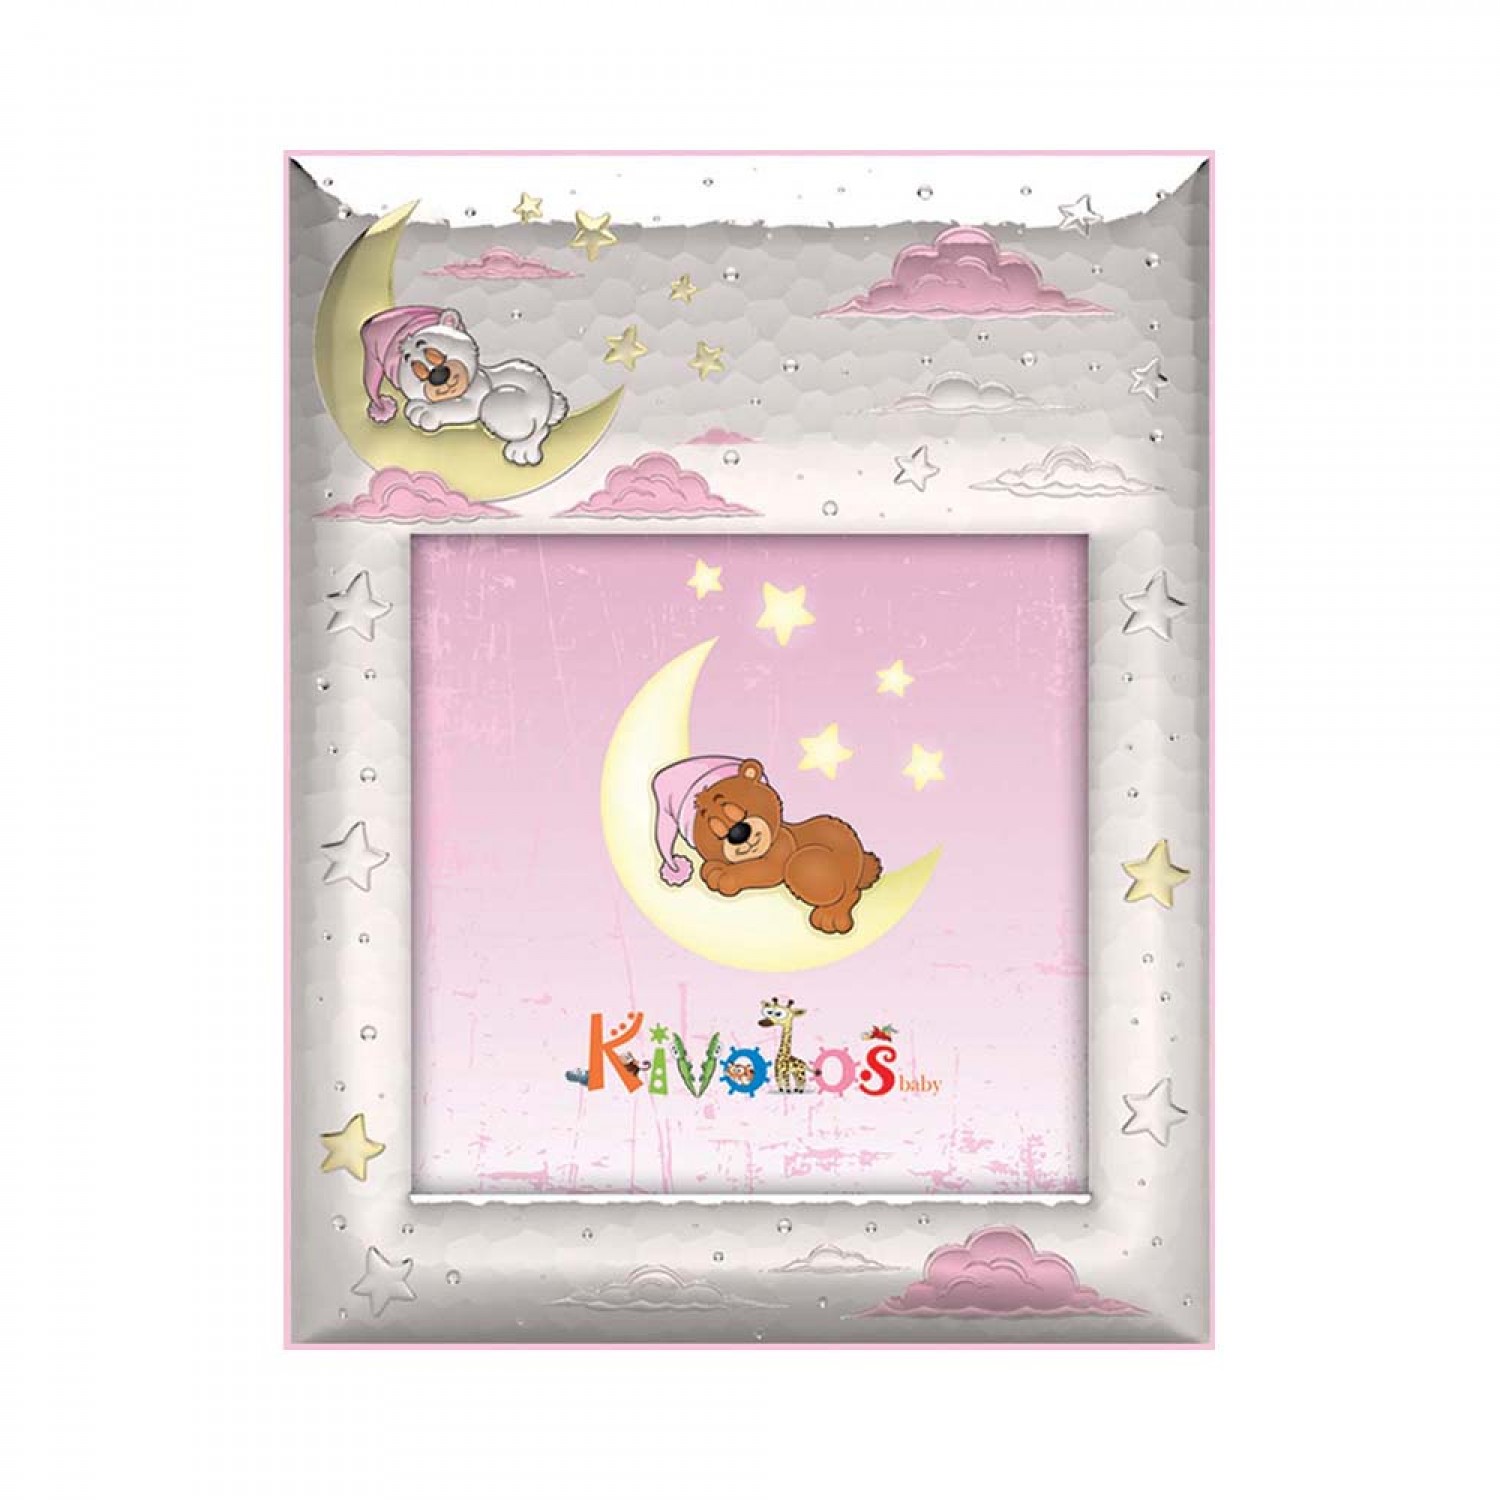 Childrens frame for little girl with teddy bear and clouds 10X10.